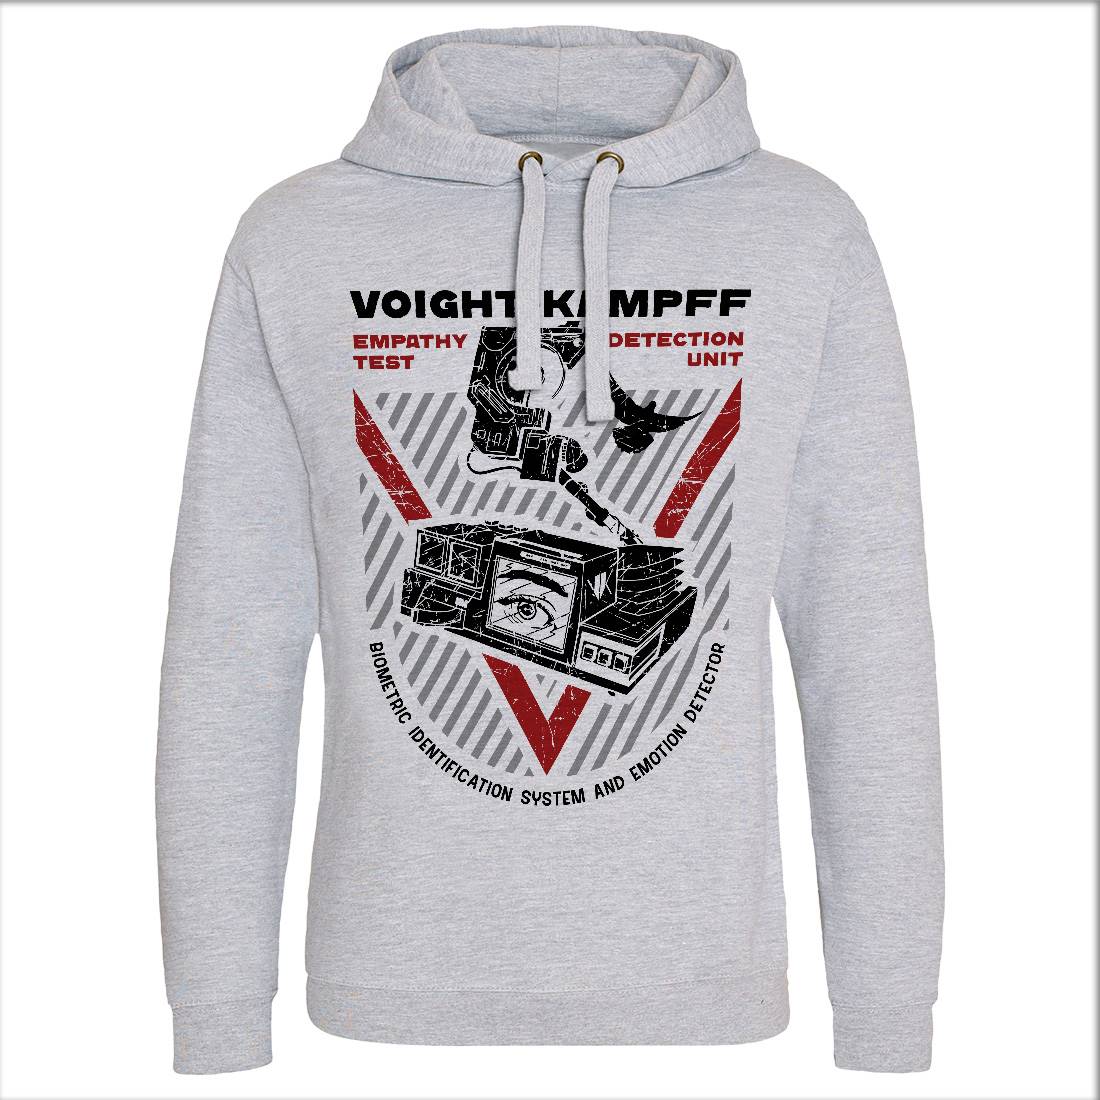 Voight Kampff Mens Hoodie Without Pocket Space D175